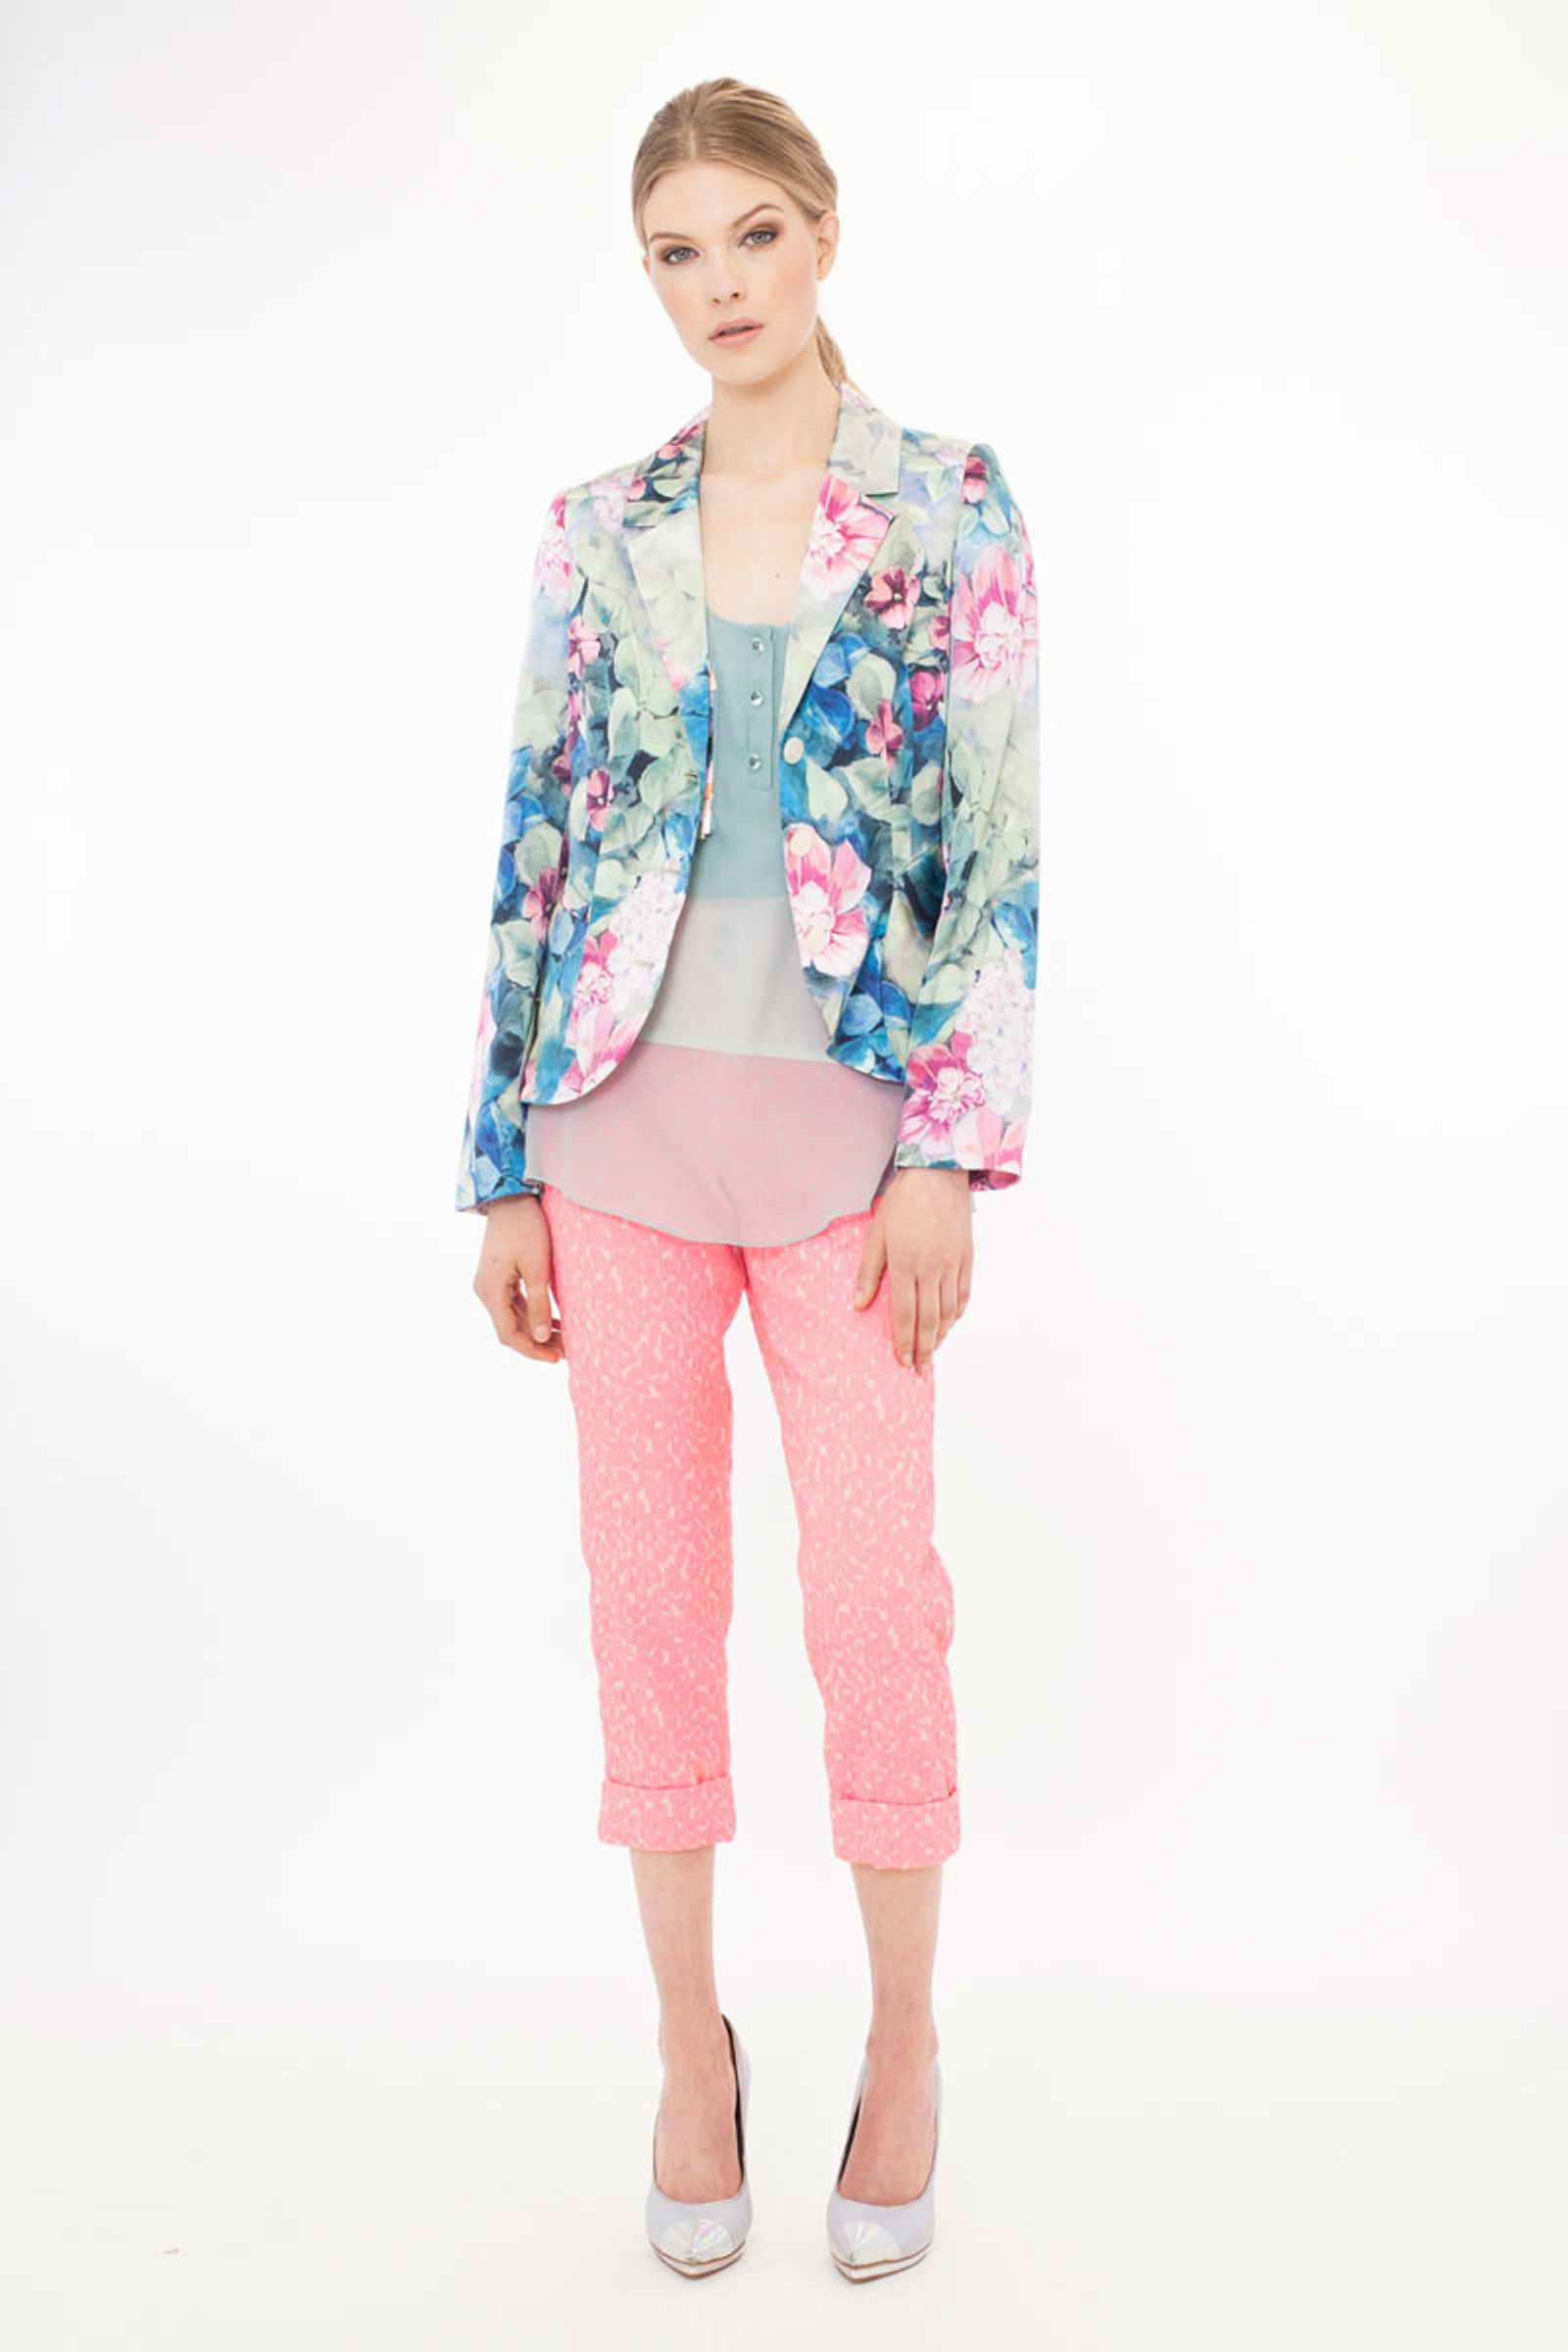 Painted Flowers 'Paint By Numbers' jacket
								, 			Simplicity 'Size to Scale' top
								, 			Brilliance 'Rock and Stroll' pant